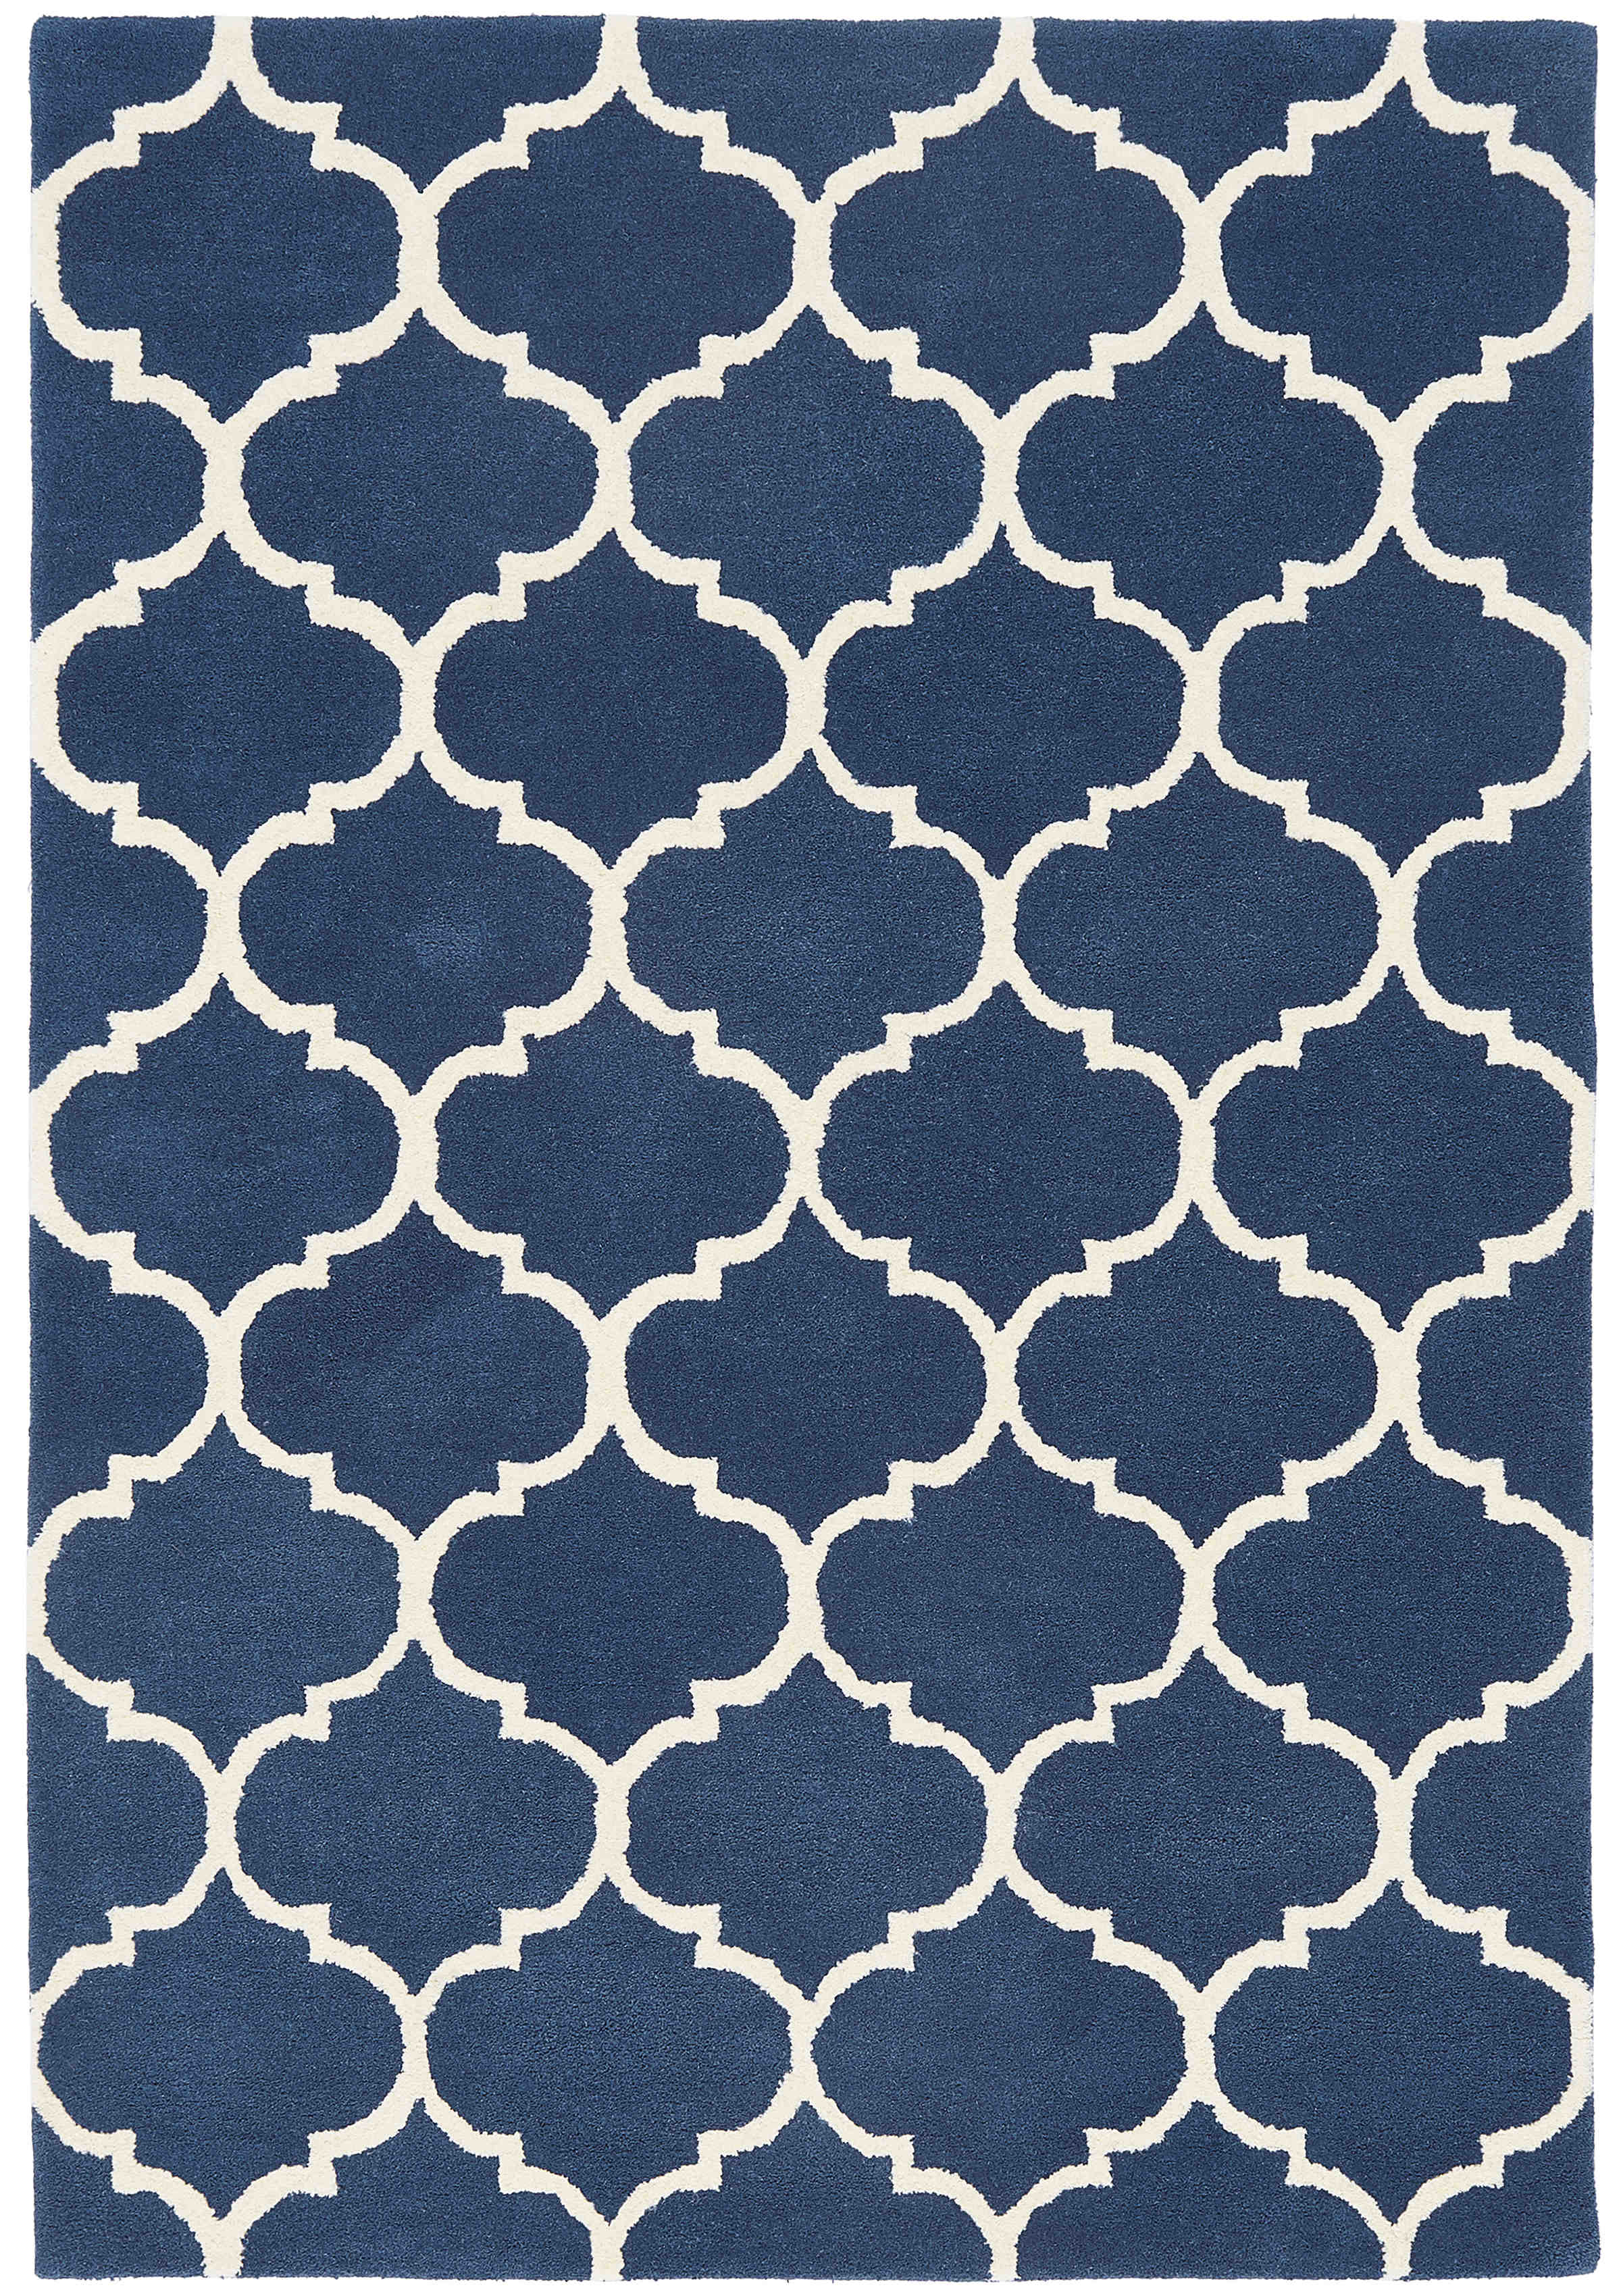 blue geometric rug with an ogee pattern